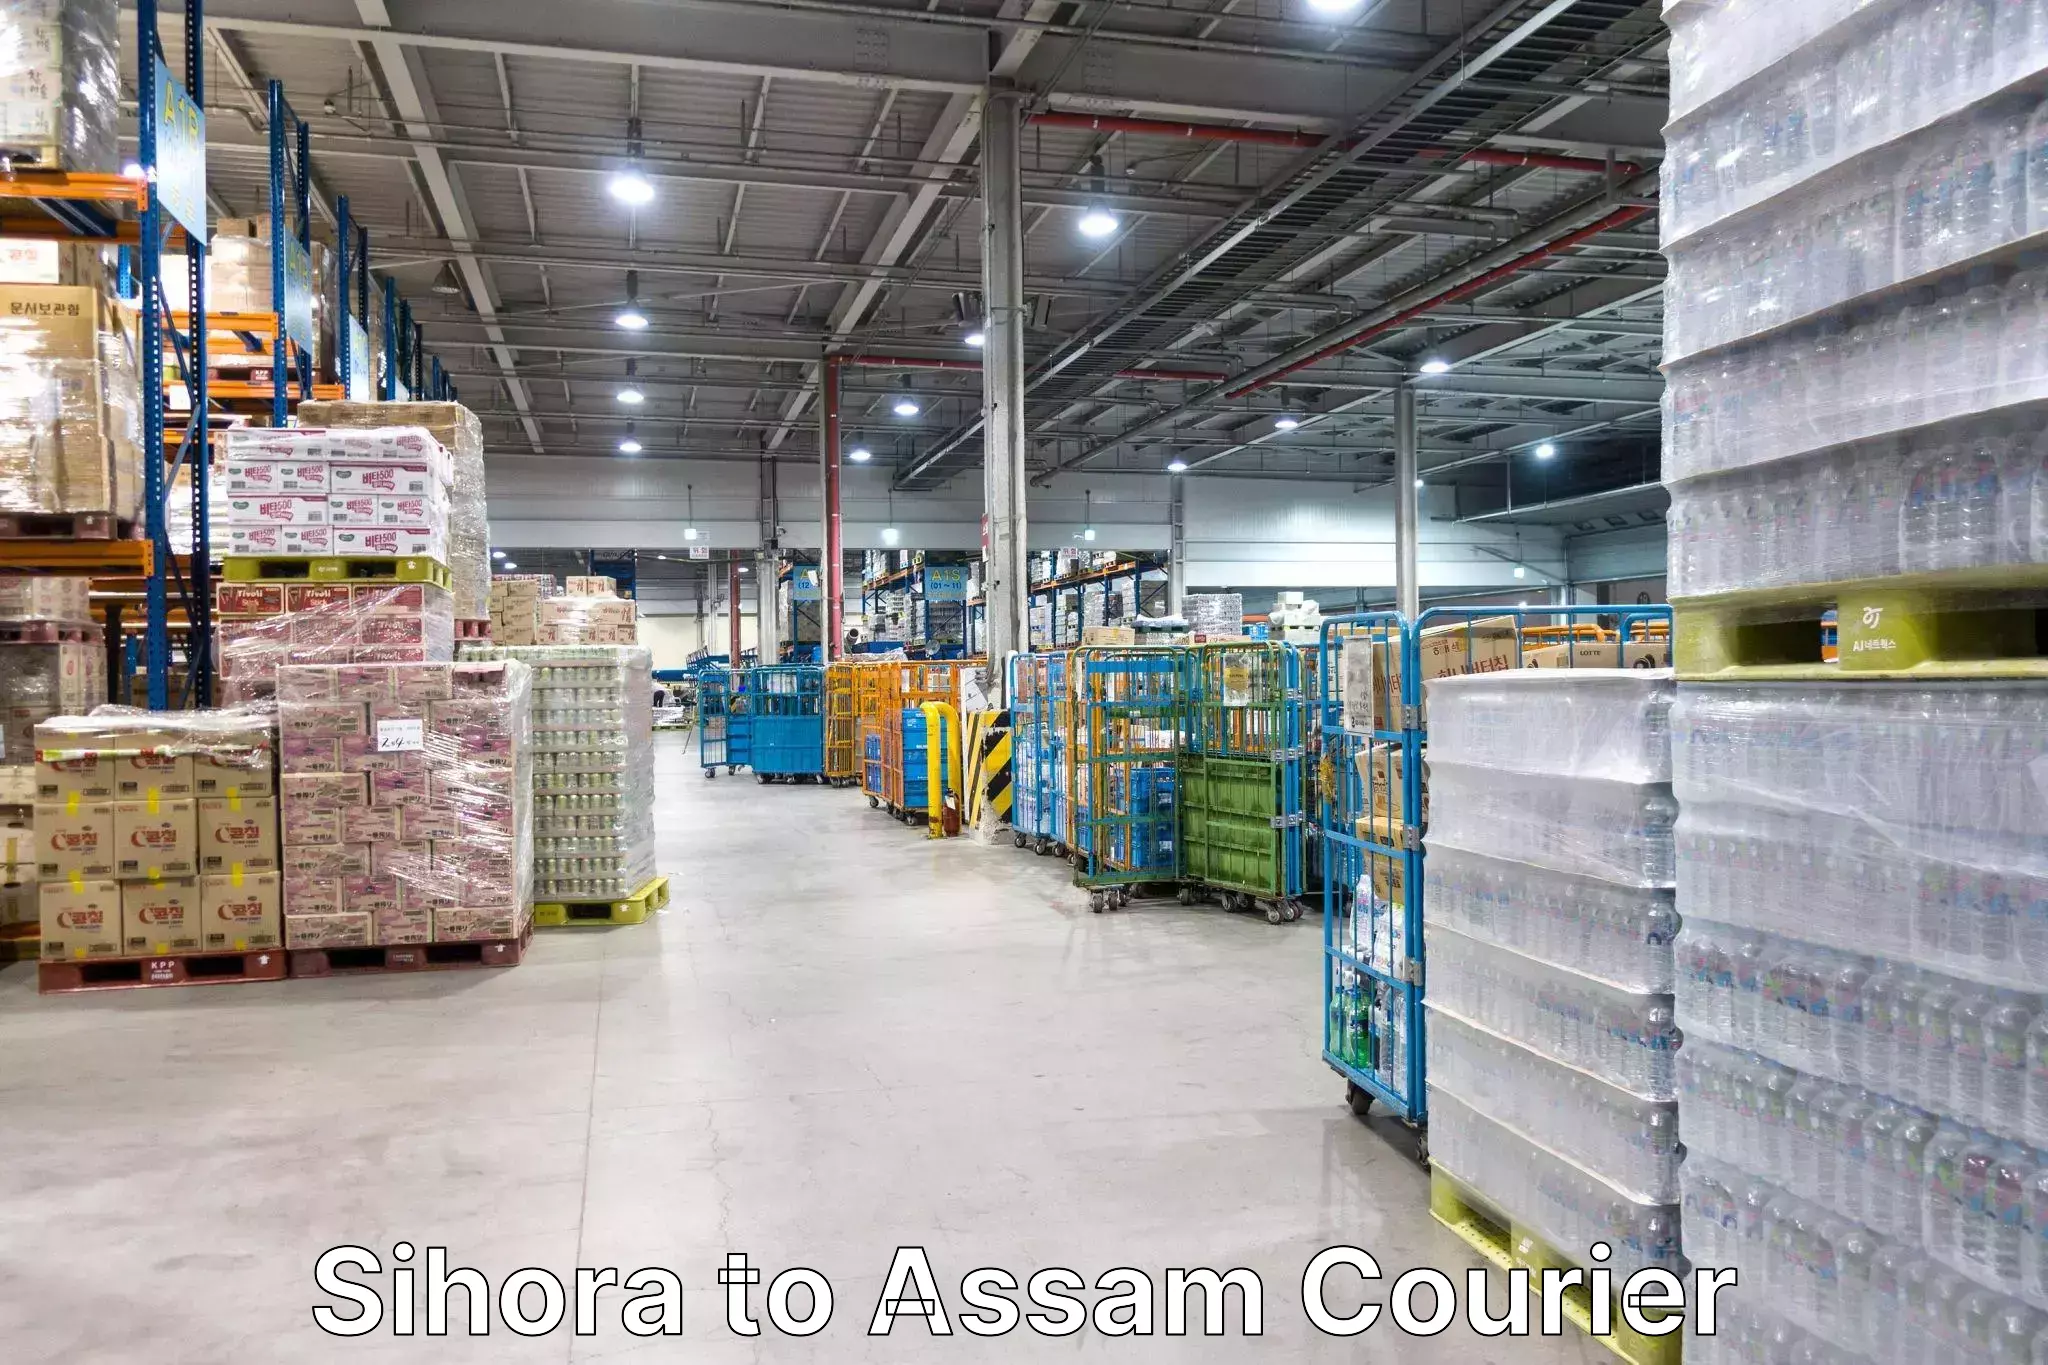 Luggage transport consultancy Sihora to Assam